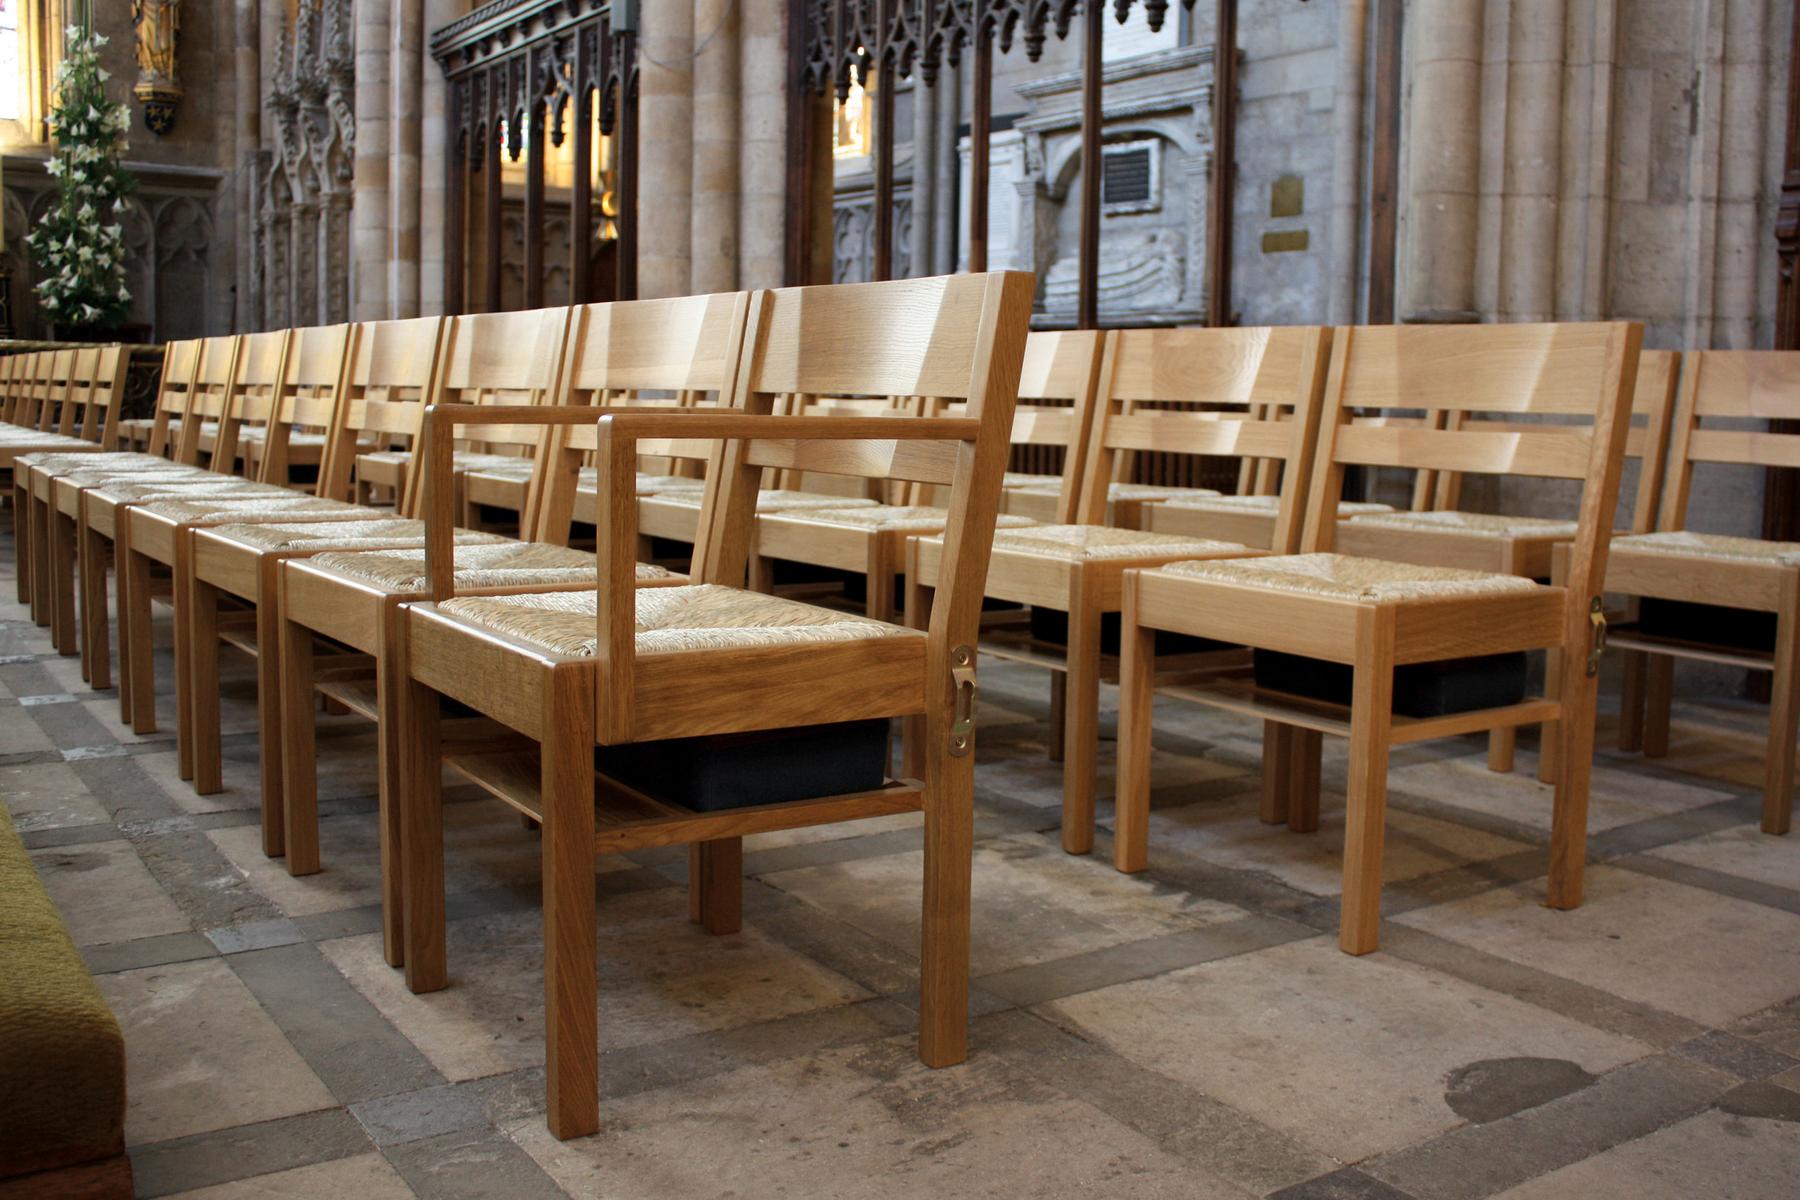 Ripon Cathedral Chairs 2